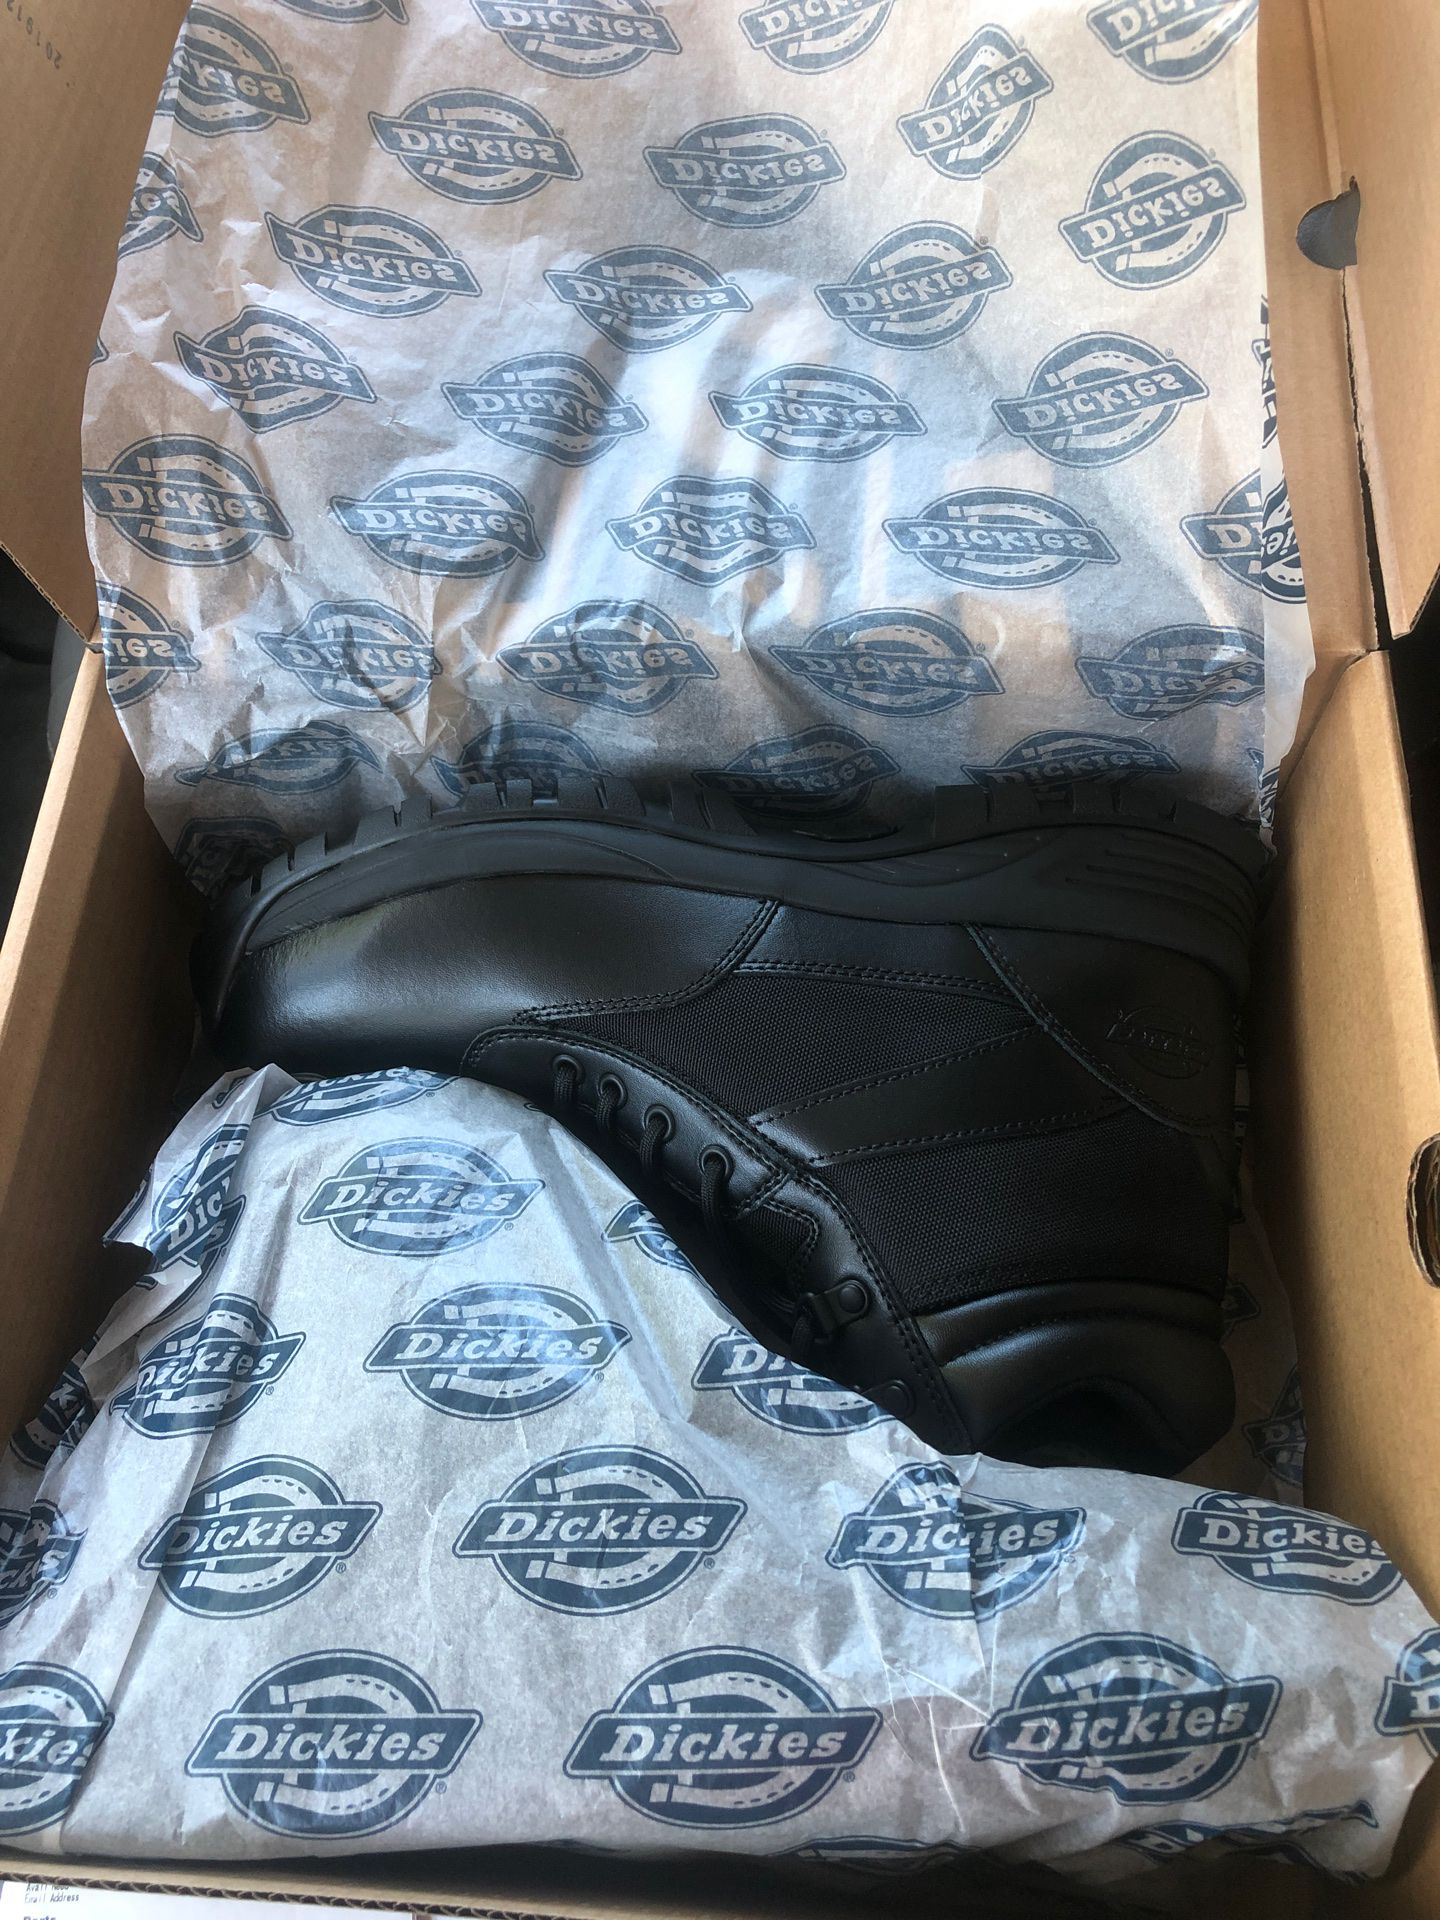 Brand new Dickies black boot size 11